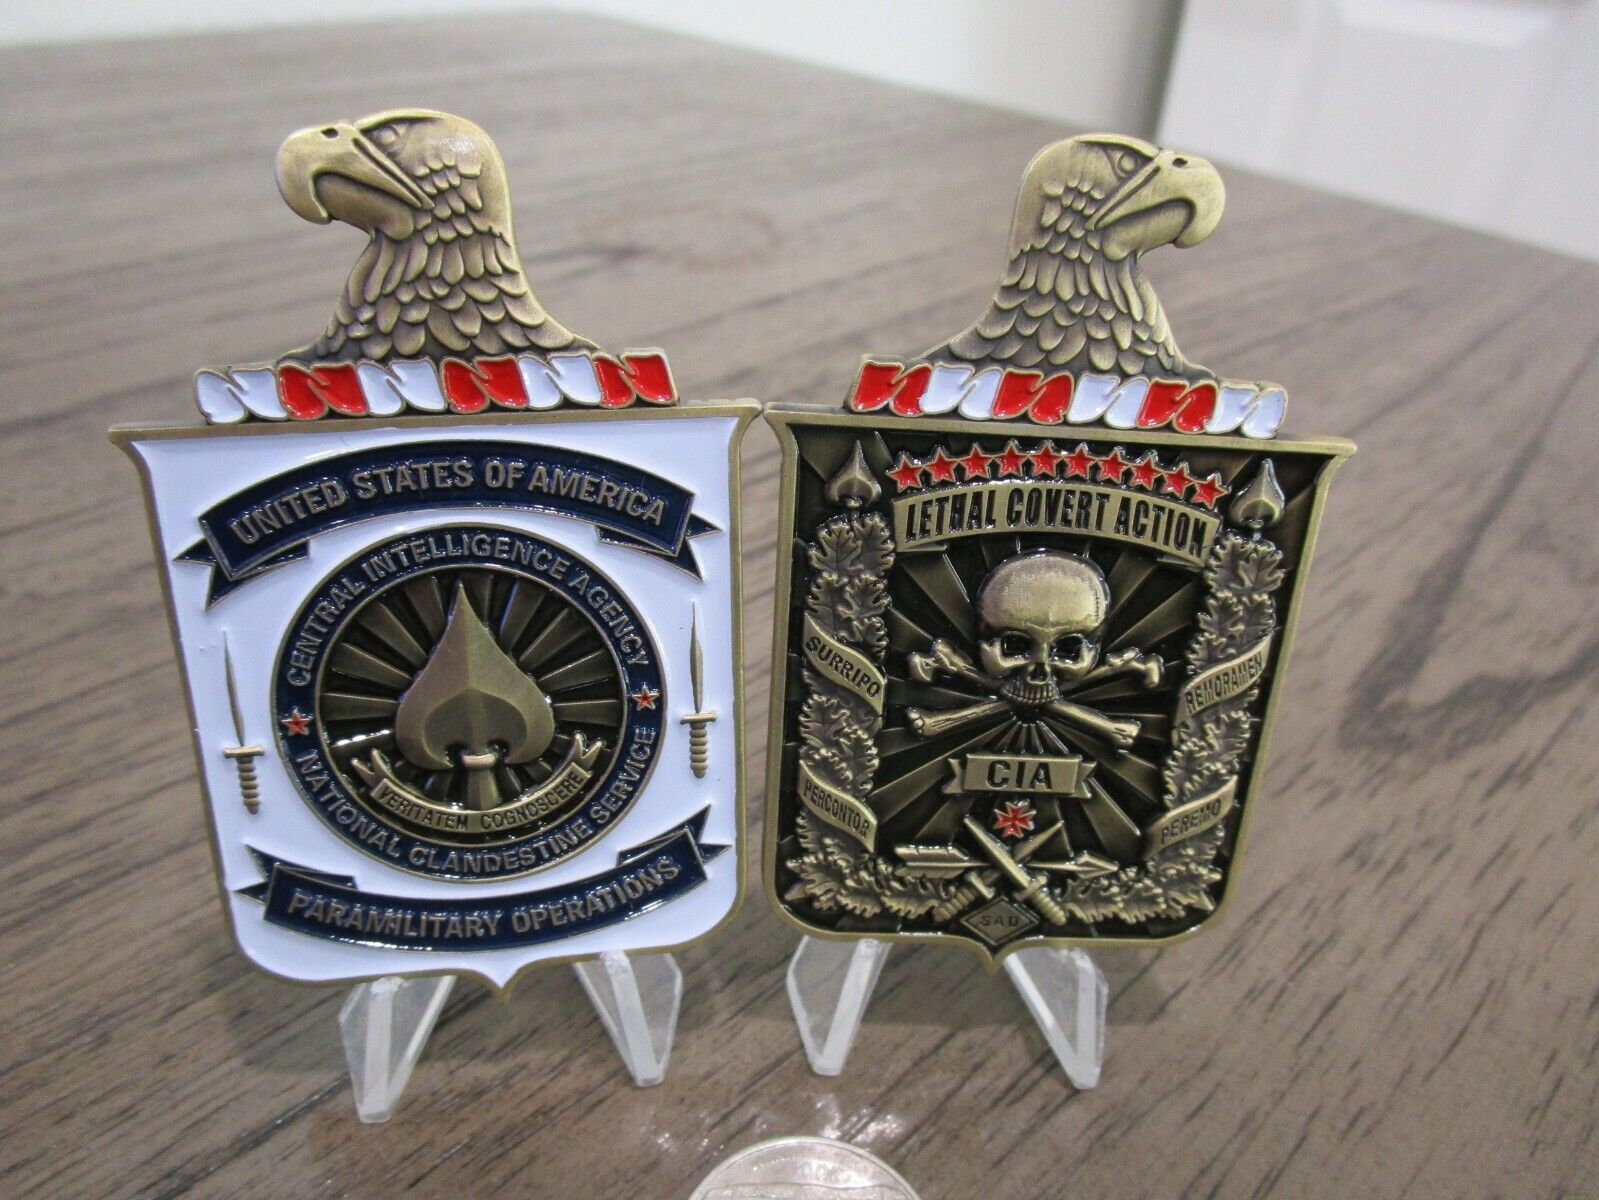 Central Intelligence Agency HUMINT Clandestine Paramilitary CIA Challenge Coin